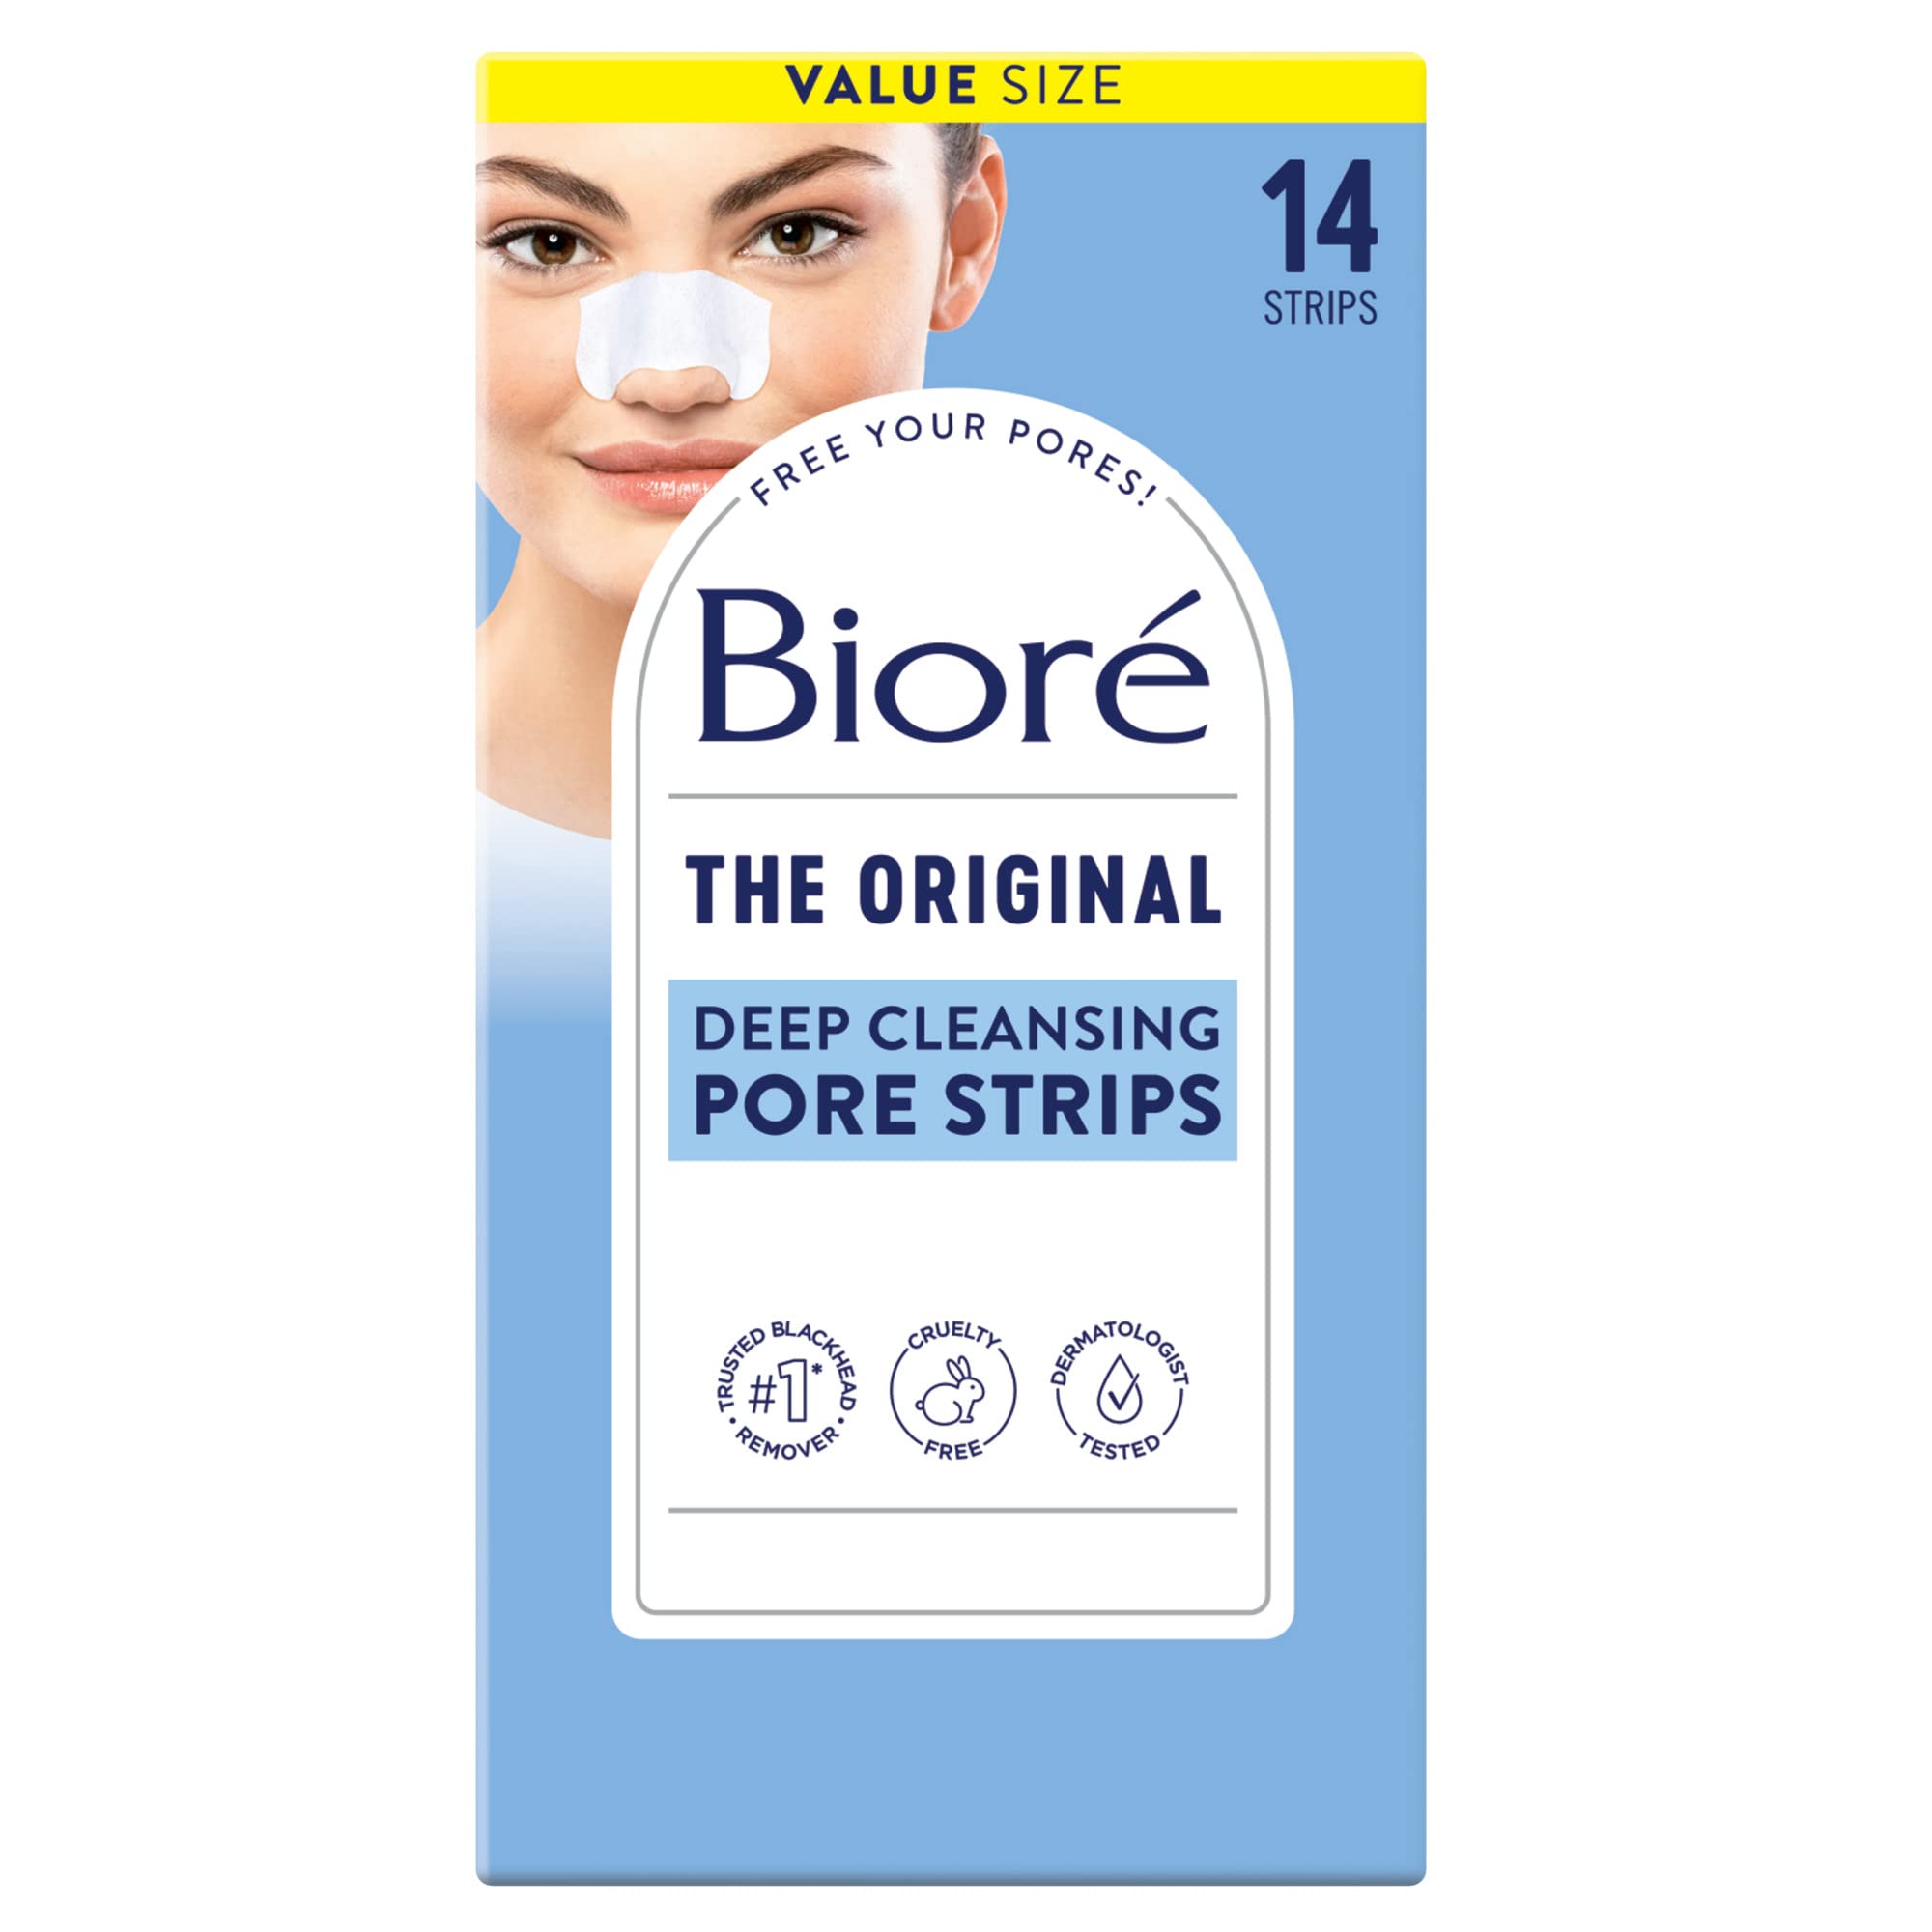 Bioré Original Blackhead Remover Strips, Deep Cleansing Nose Strips With Instant Pore Unclogging, Features C-Bond Technology, Oil-Free, Non-Comedogenic Use, 14 Count